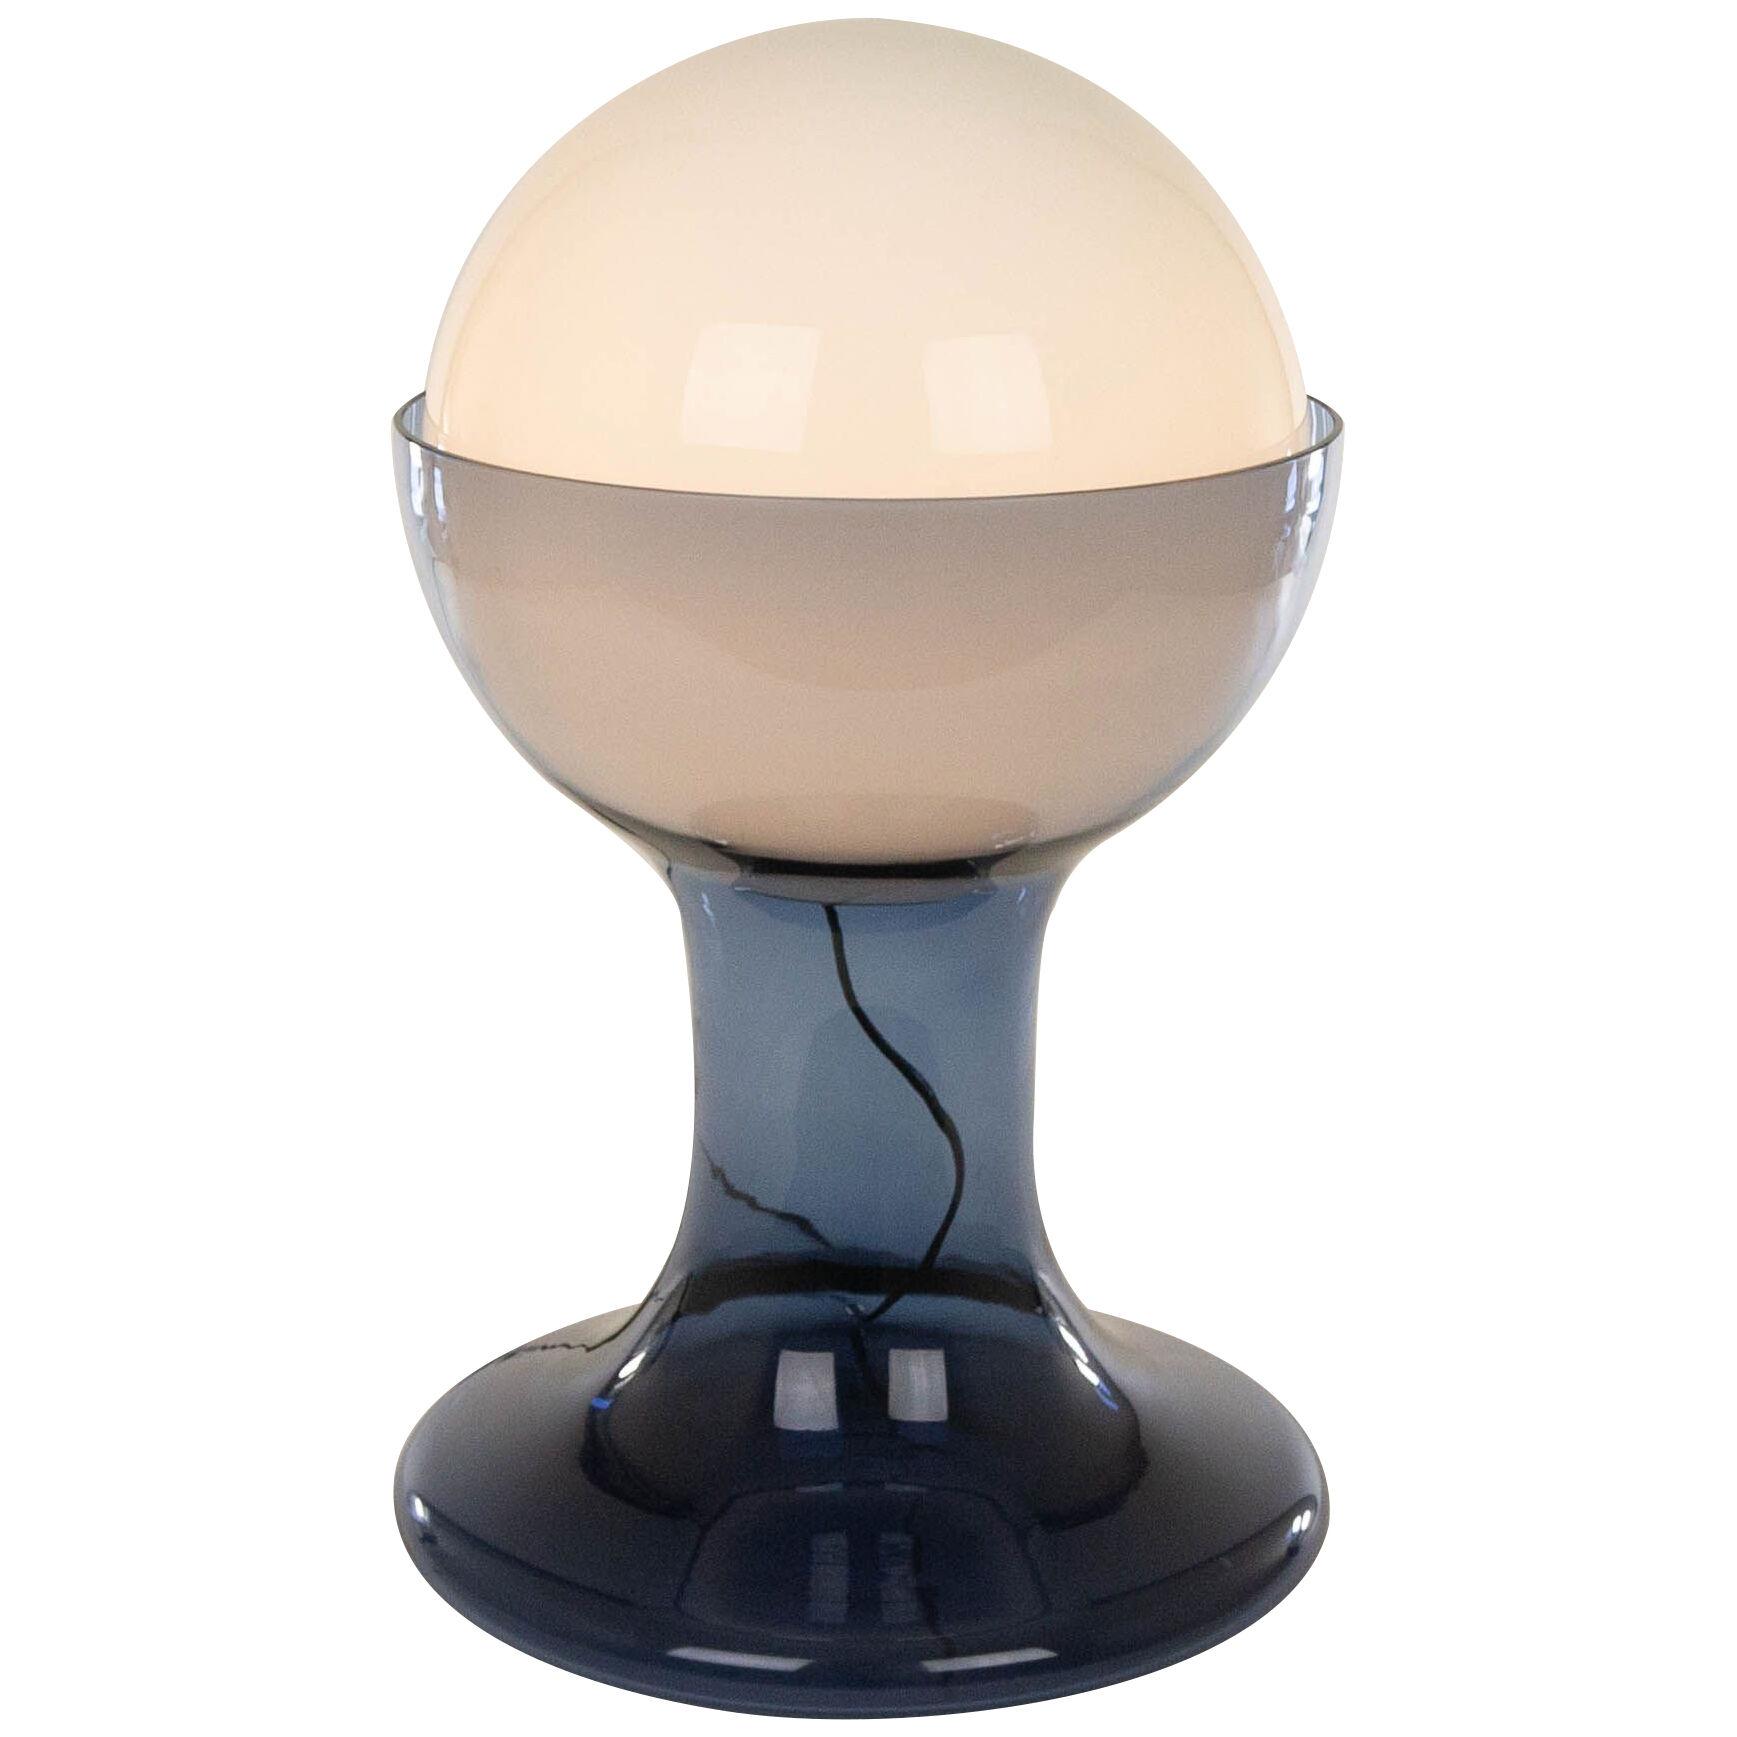 Large blue LT 216 table lamp by Carlo Nason for A.V. Mazzega, 1960s